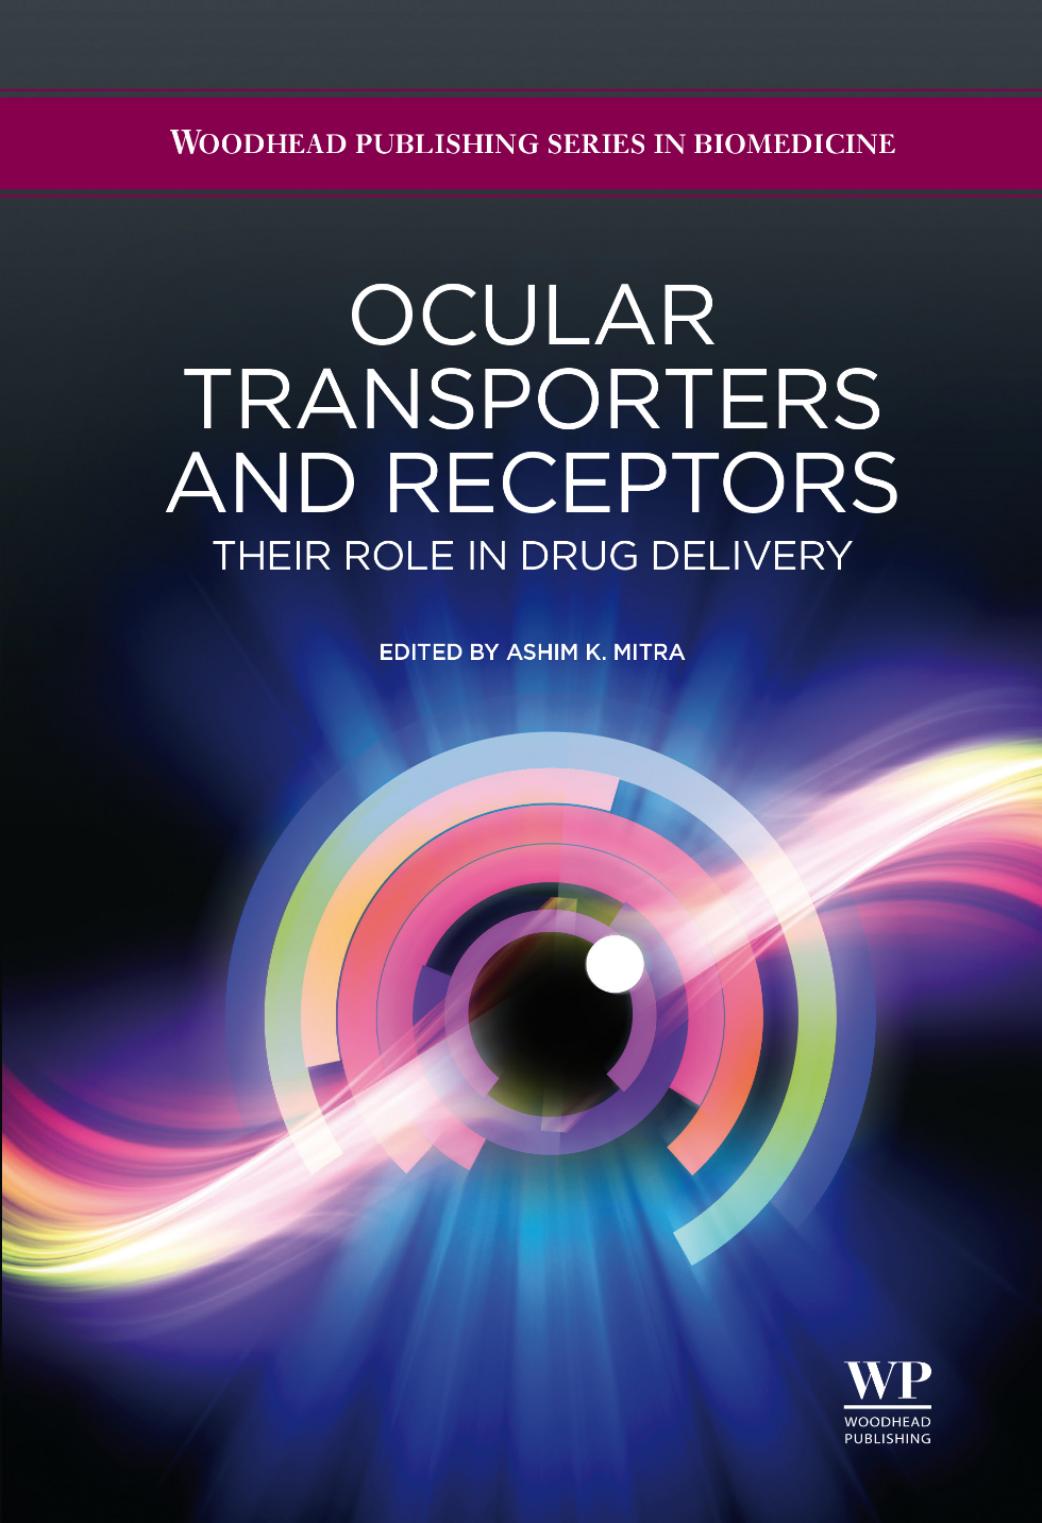 Ocular transporters and receptors  Their role in drug delivery 2013